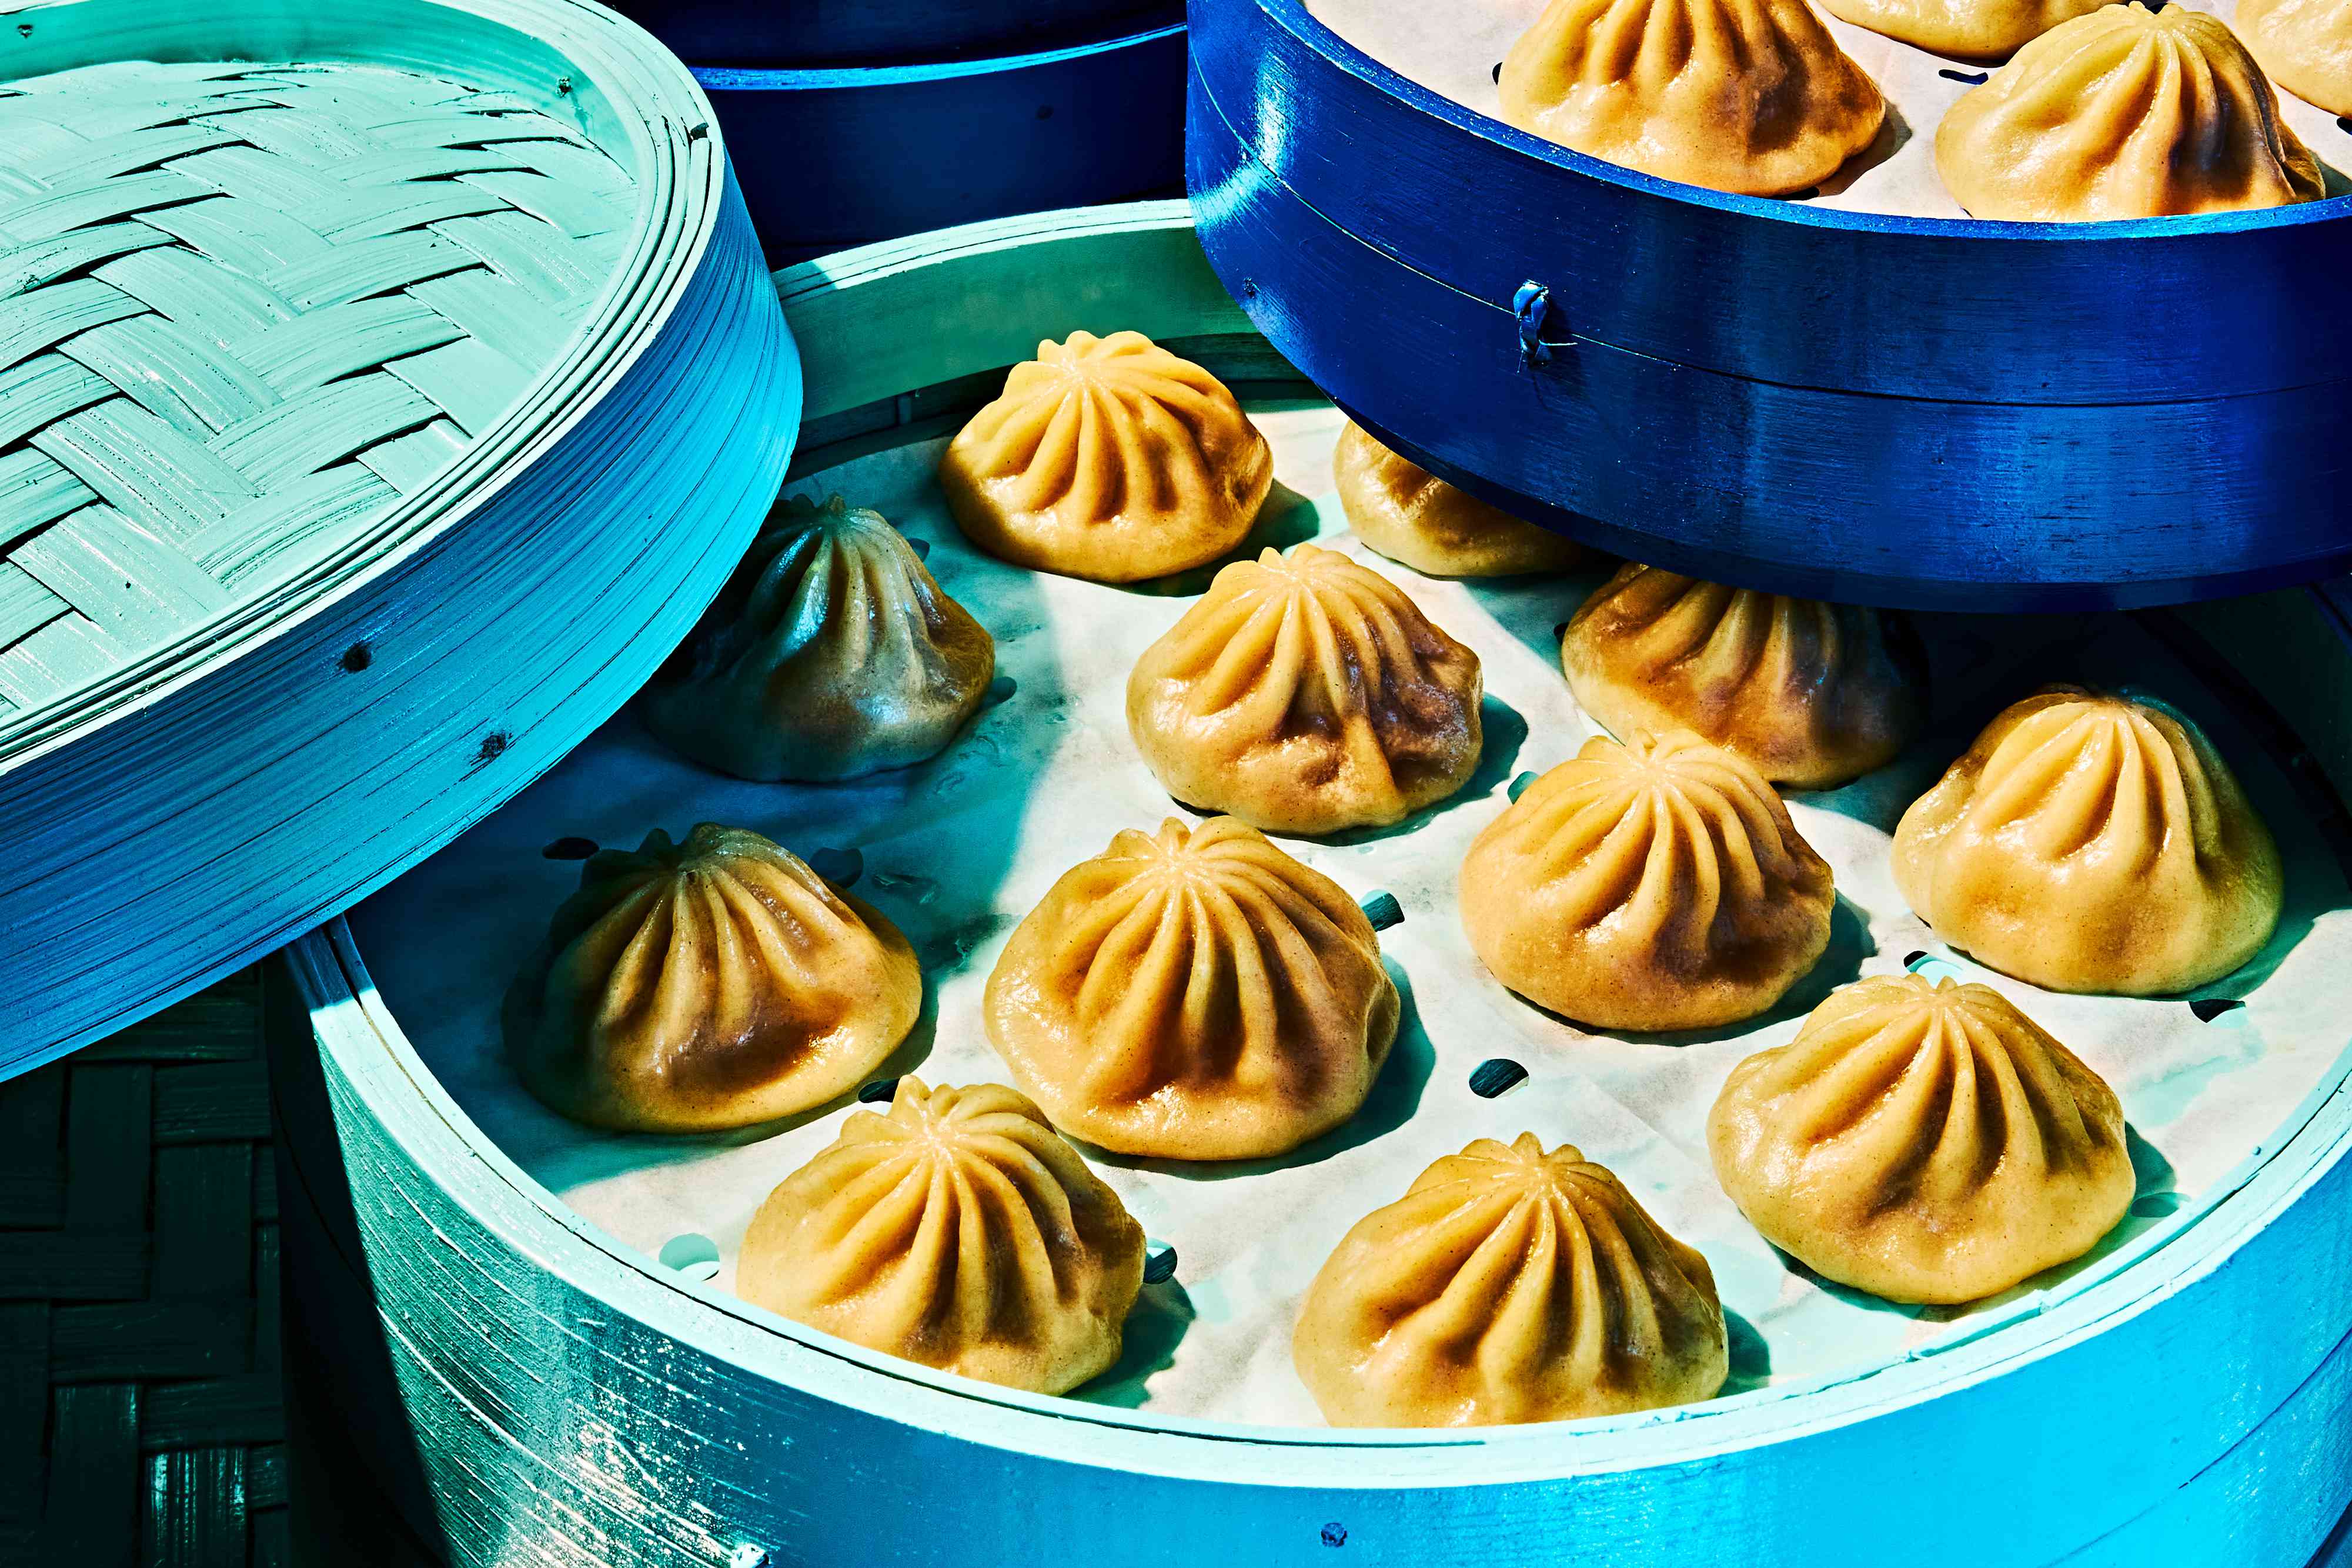 Restaurant-Quality Soup Dumplings Are Finally Available at the Freezer Aisle